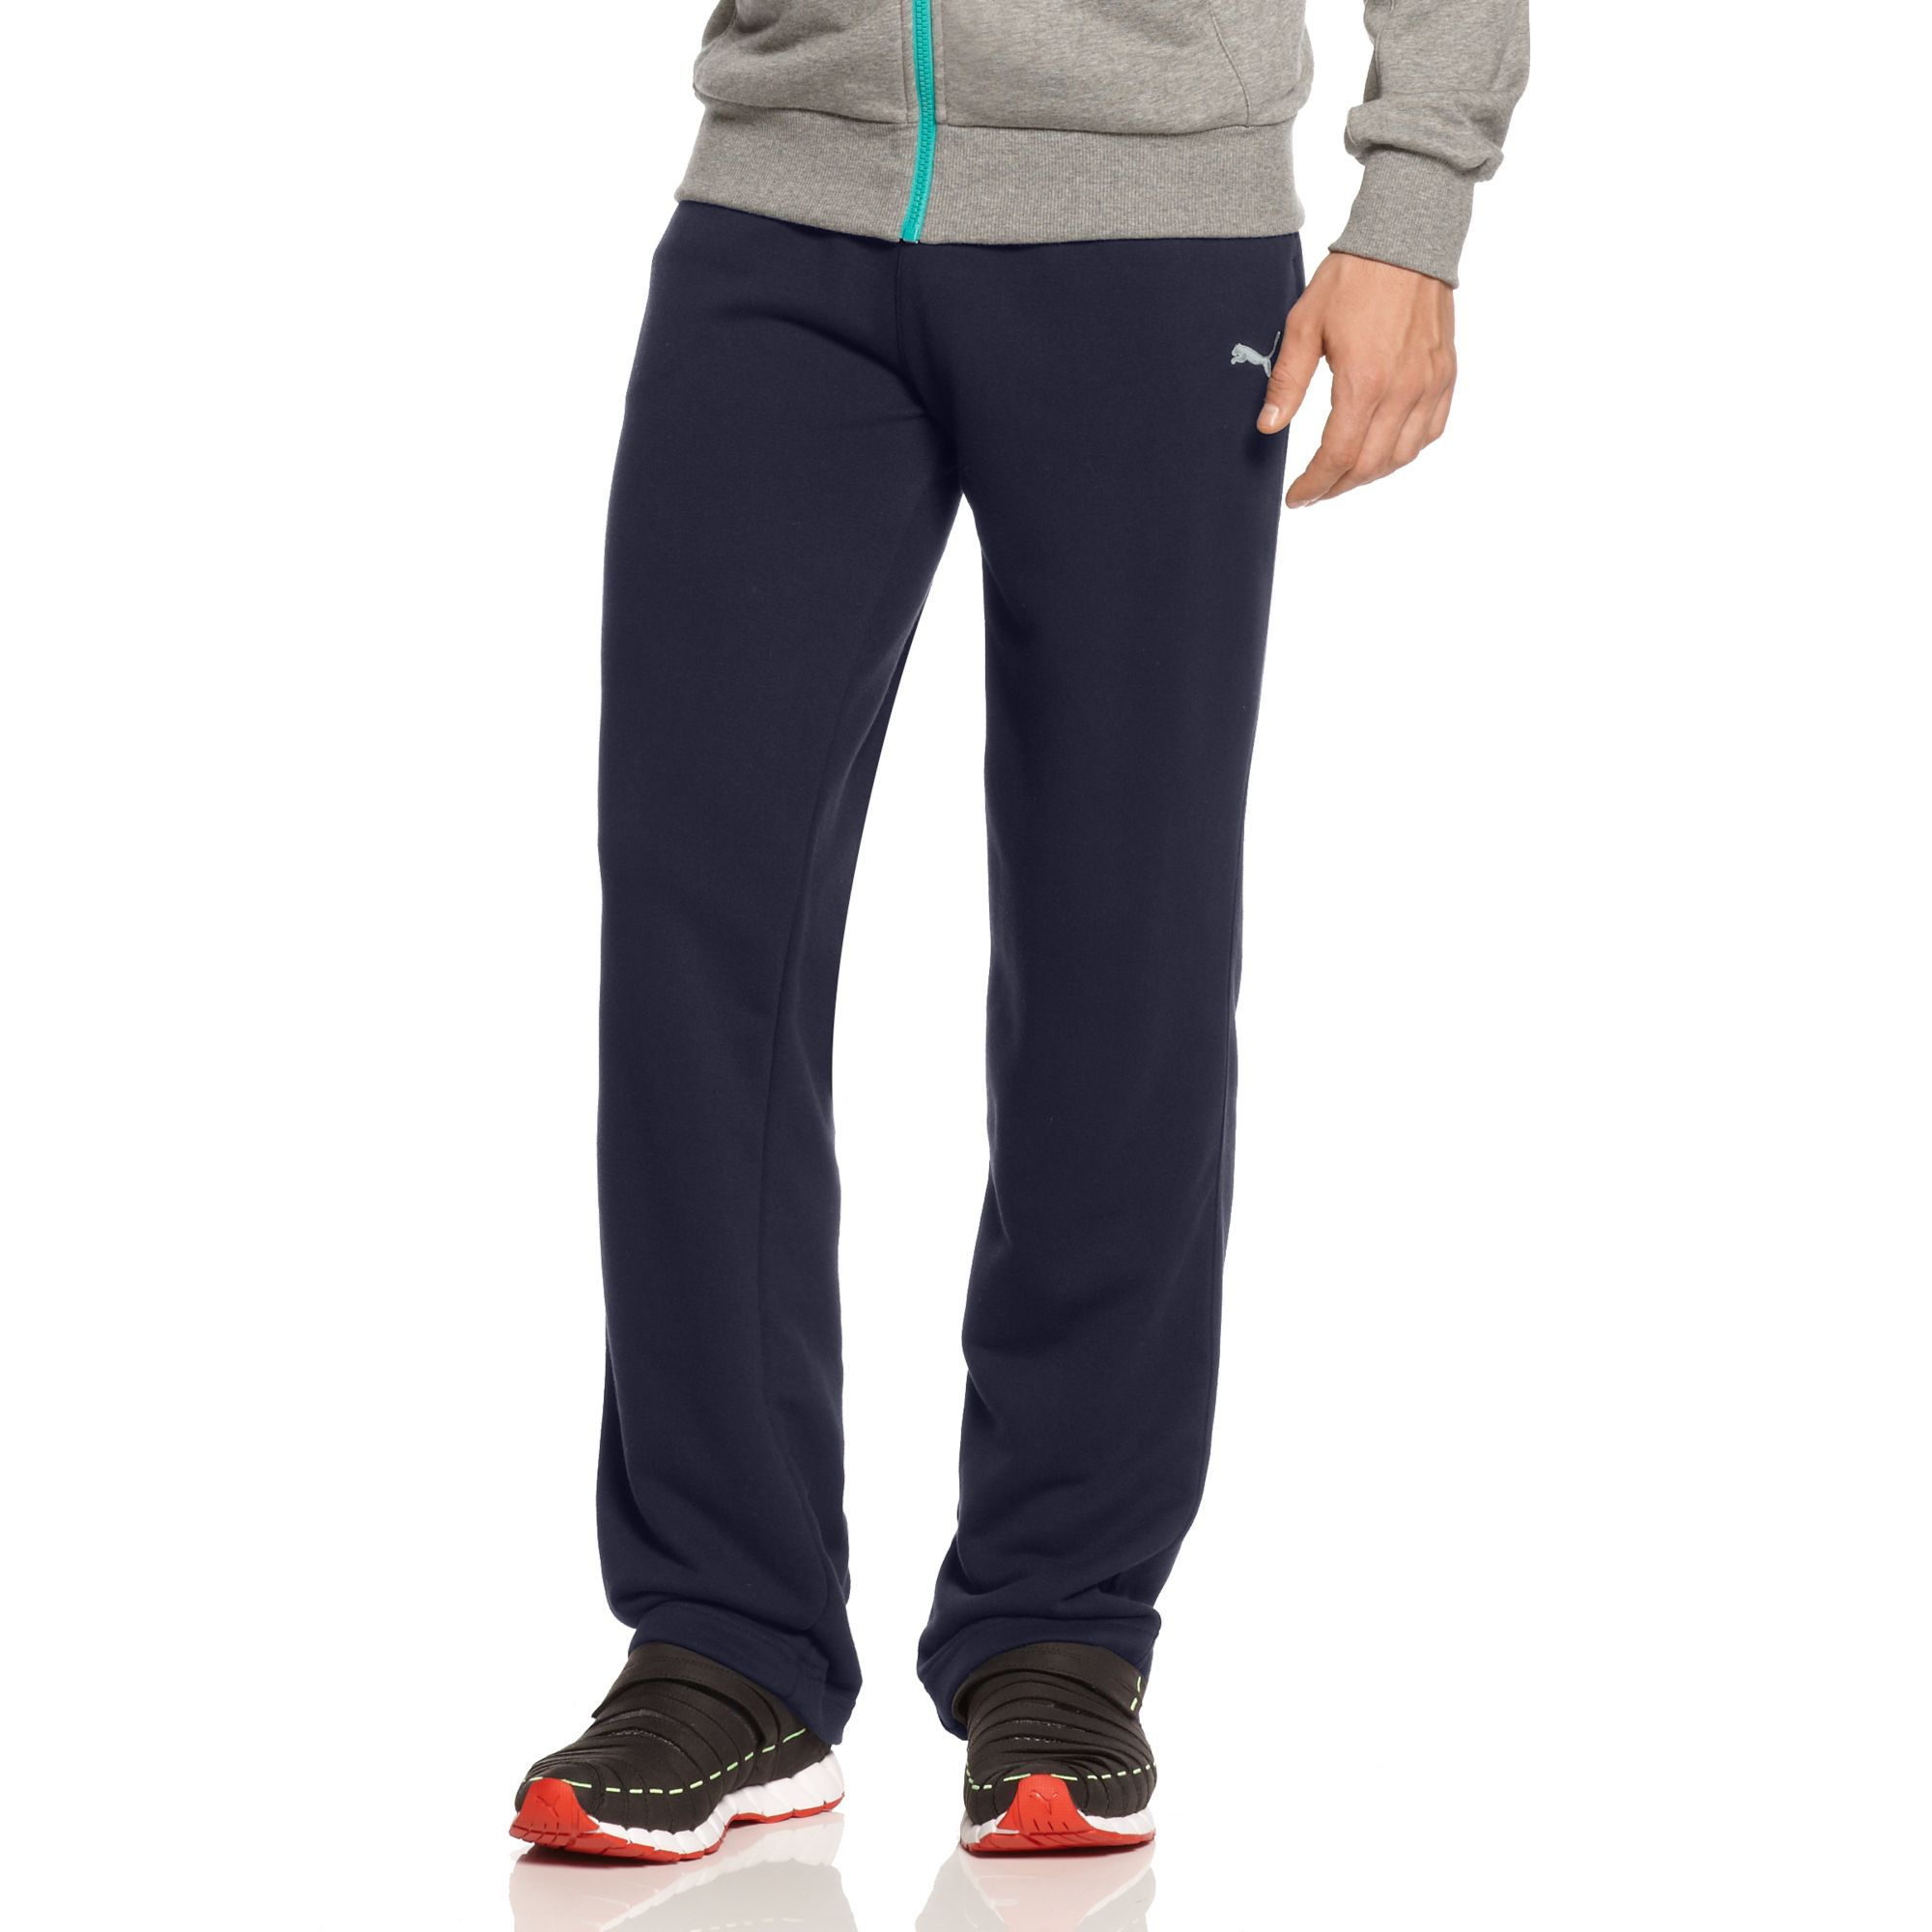 Lyst - Puma French Terry Pants in Blue for Men